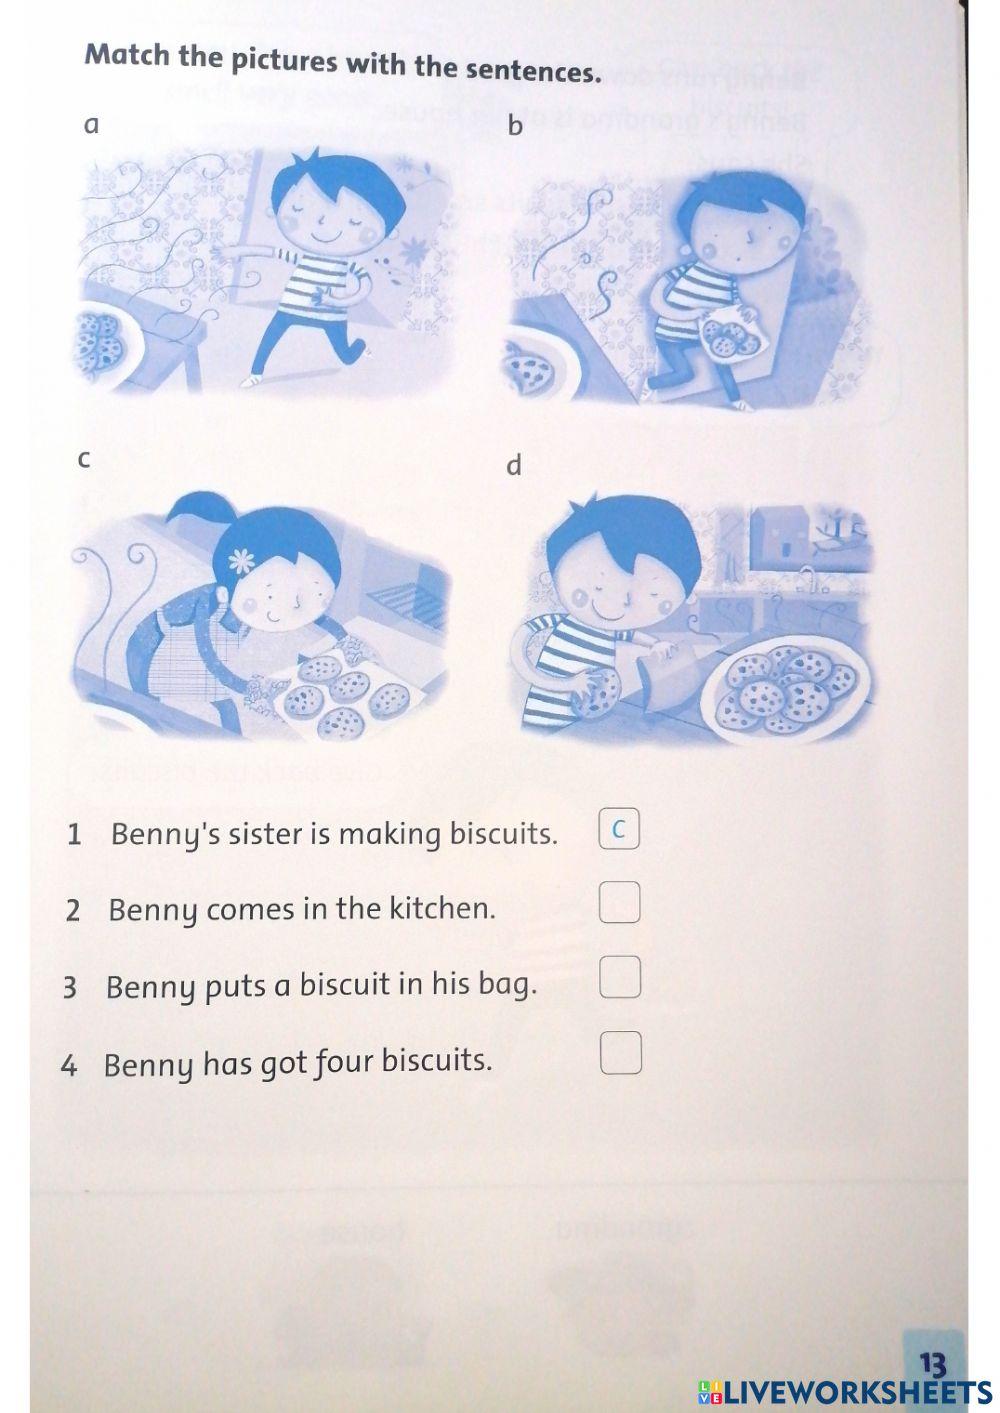 Benny and biscuits part 2 worksheet